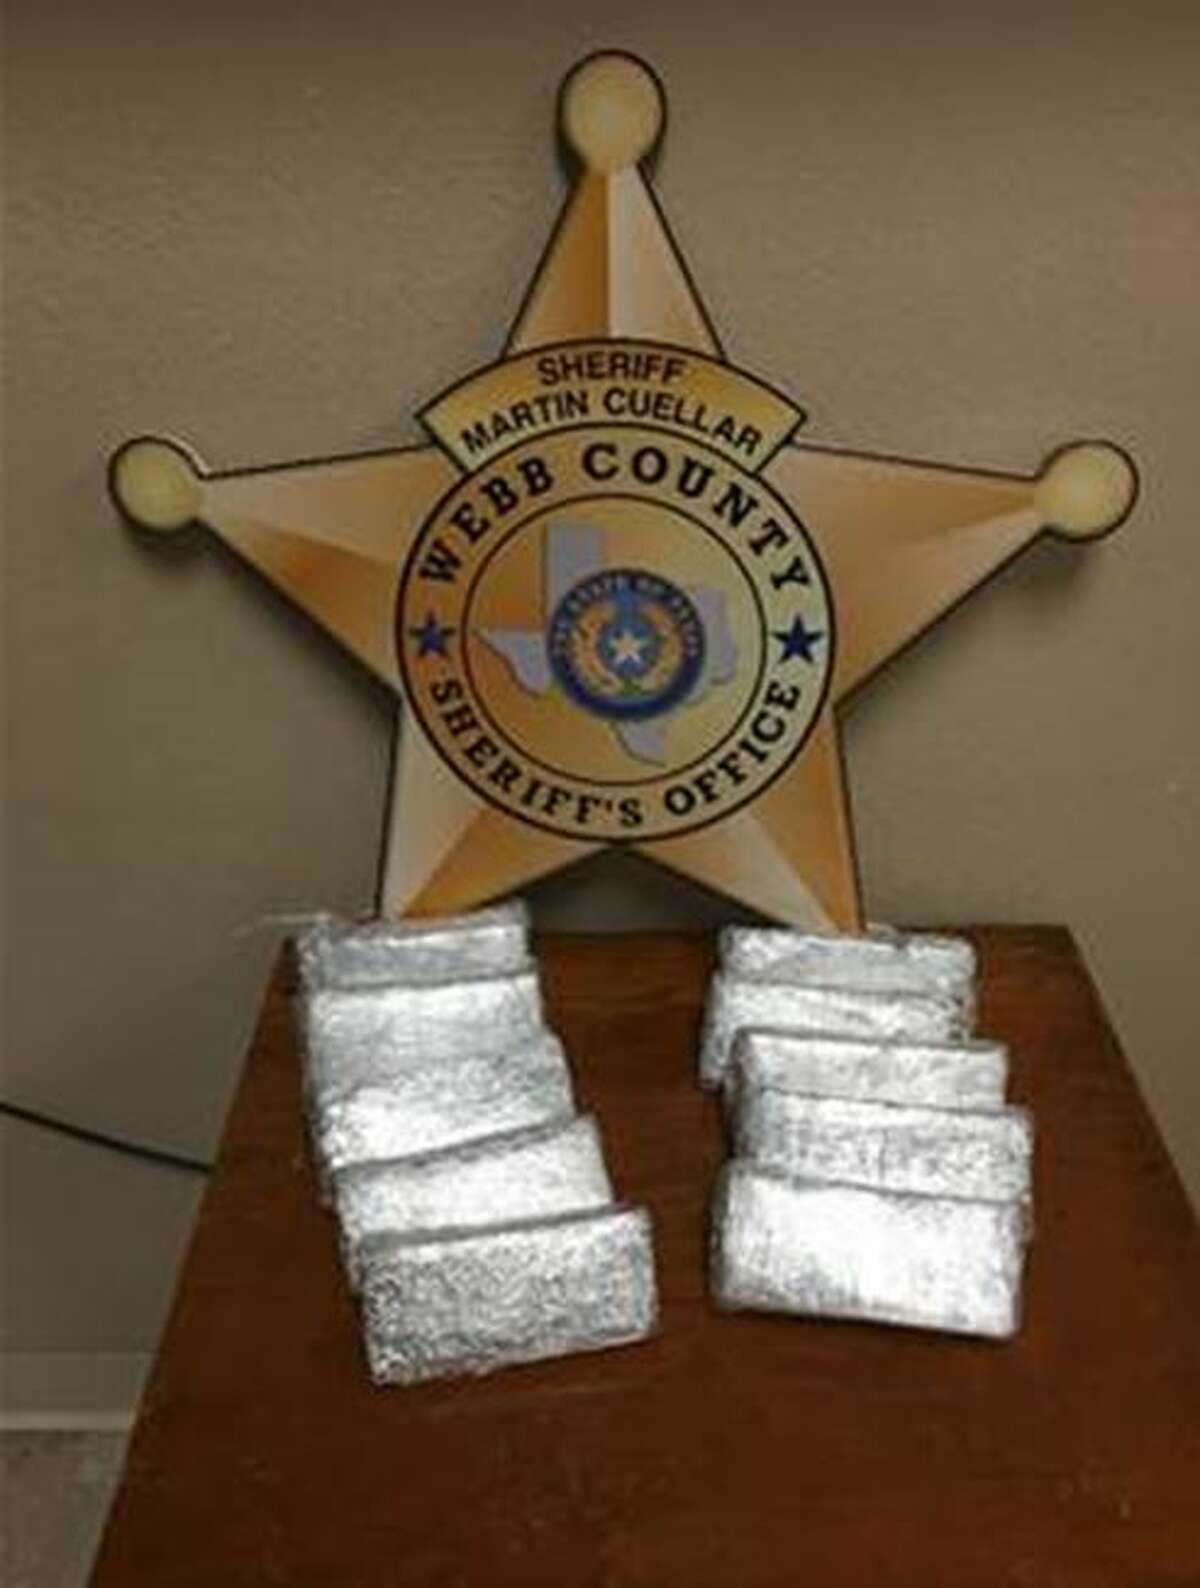 Over $100,000 was seized Monday after a Webb County sheriff's deputy pulled over a vehicle on Monday on South Interstate 35. 